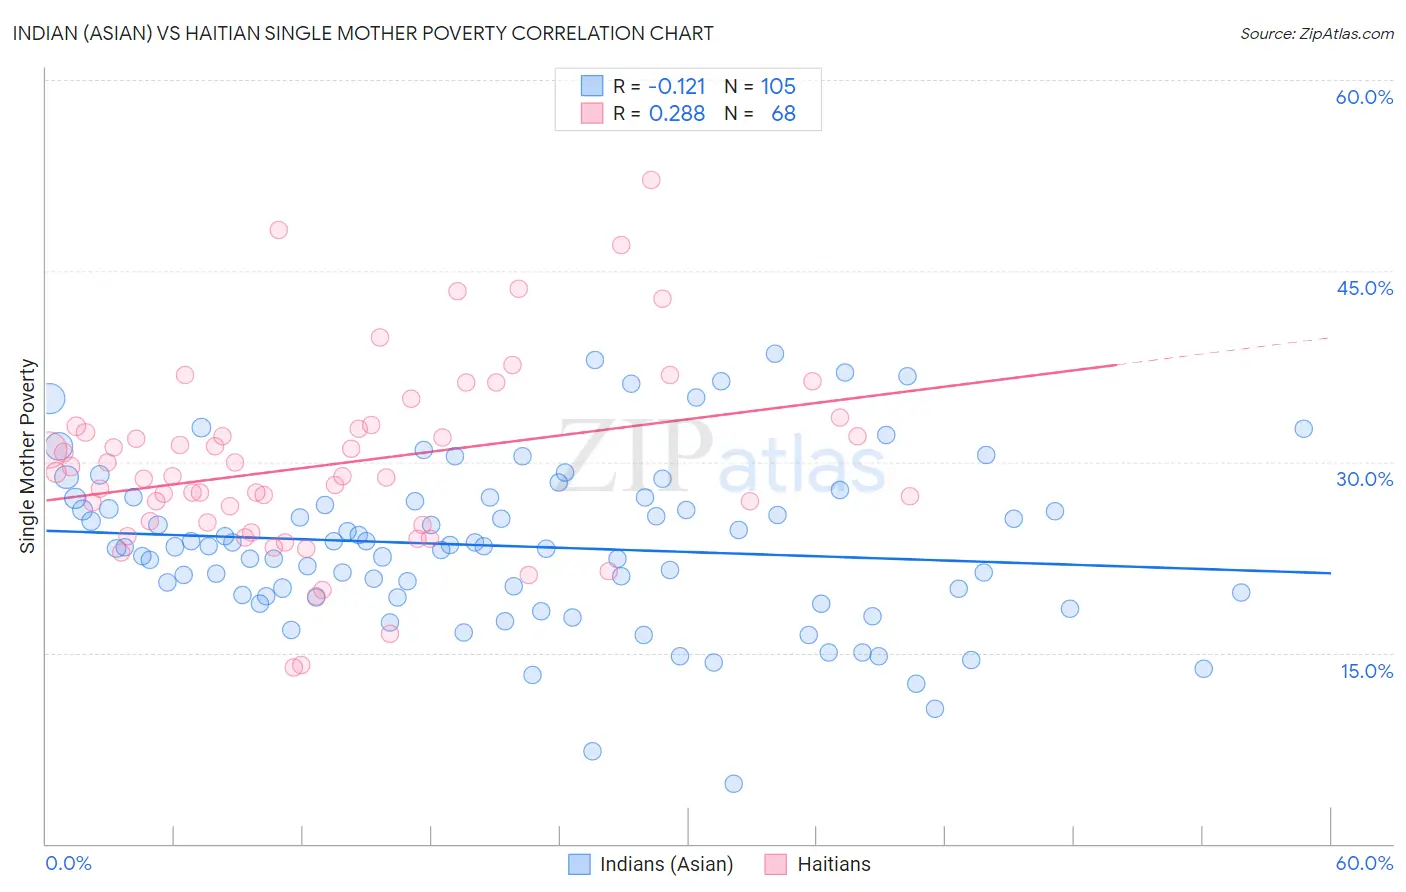 Indian (Asian) vs Haitian Single Mother Poverty